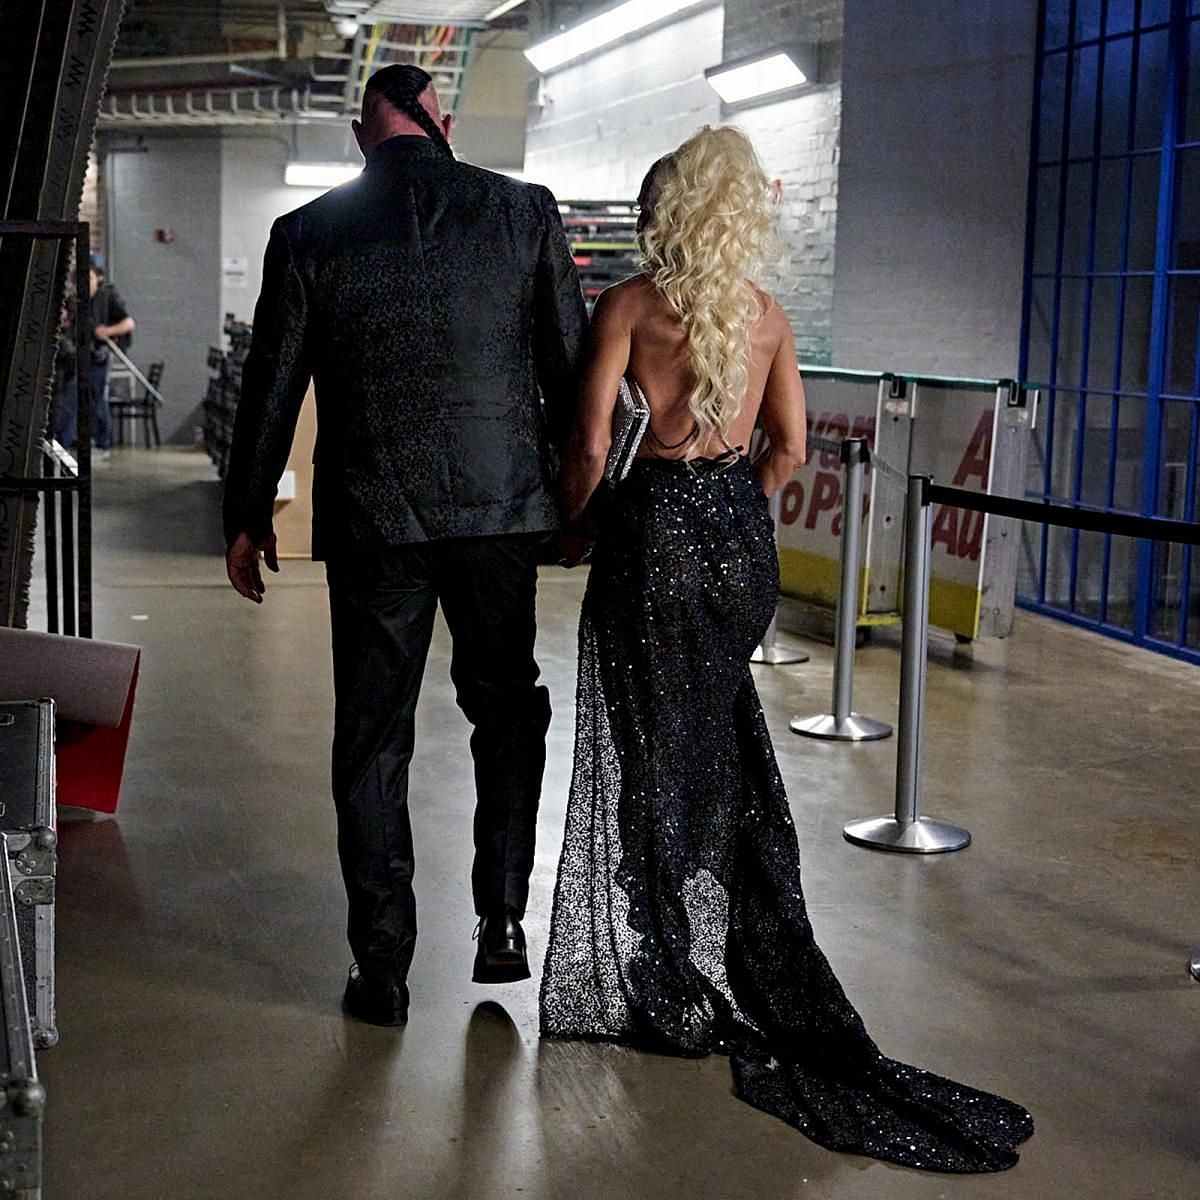 The Undertaker and Michelle McCool.